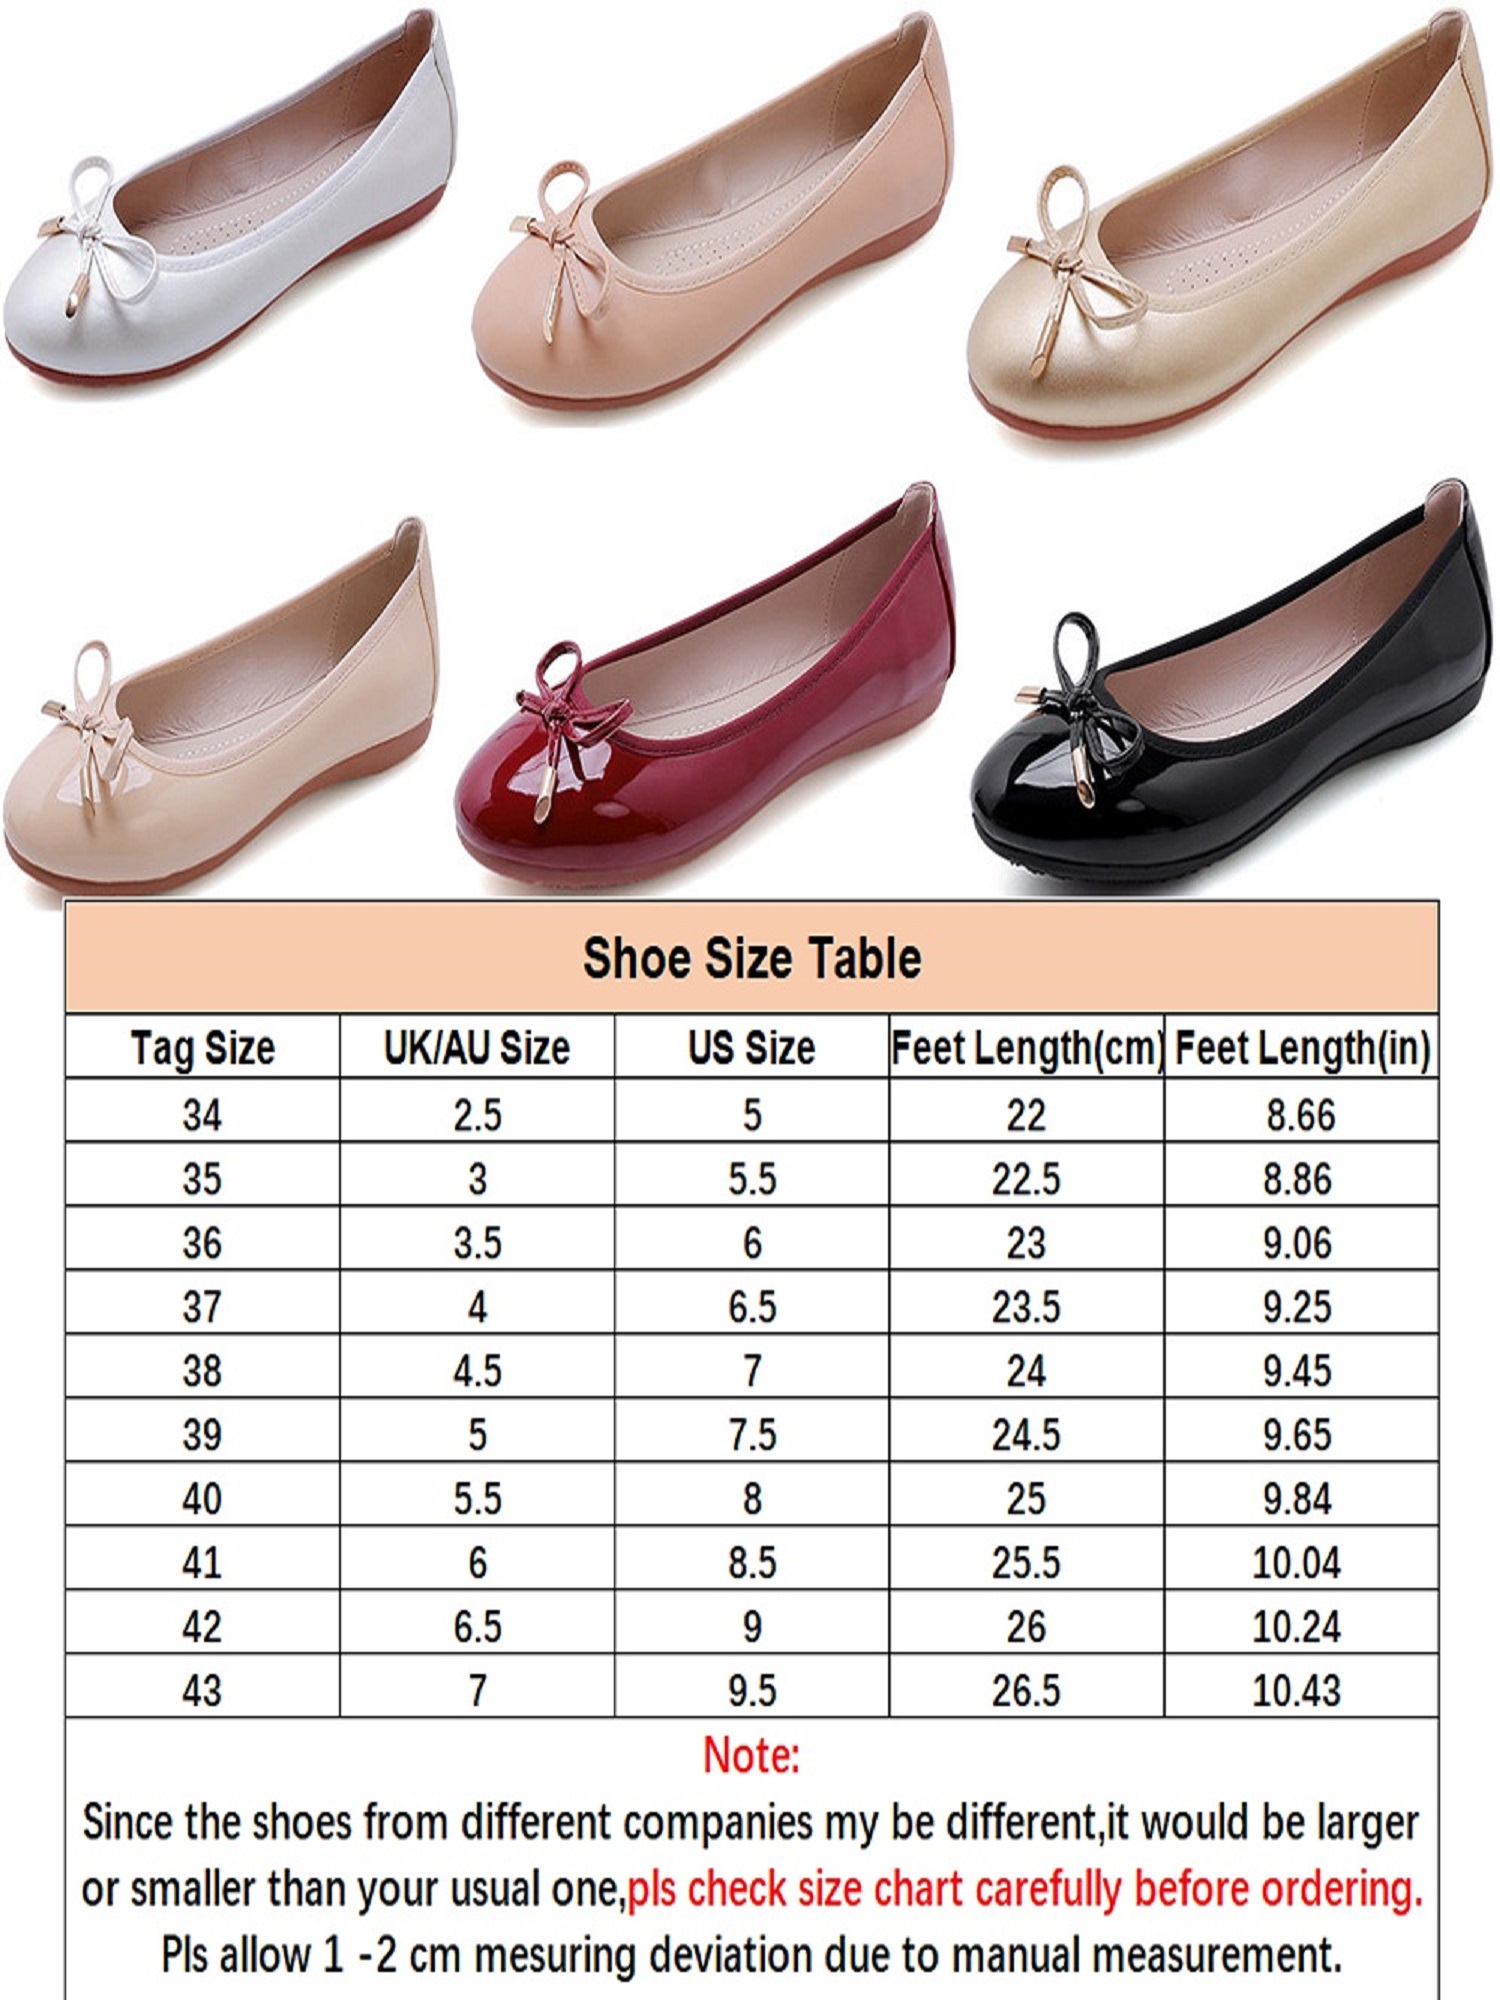 Wazshop Womens Ballet Ballerina Dolly Pumps Ladies Flat Slip On Loafers Leather Shoes Girls Dress Dance Shoes - image 2 of 3